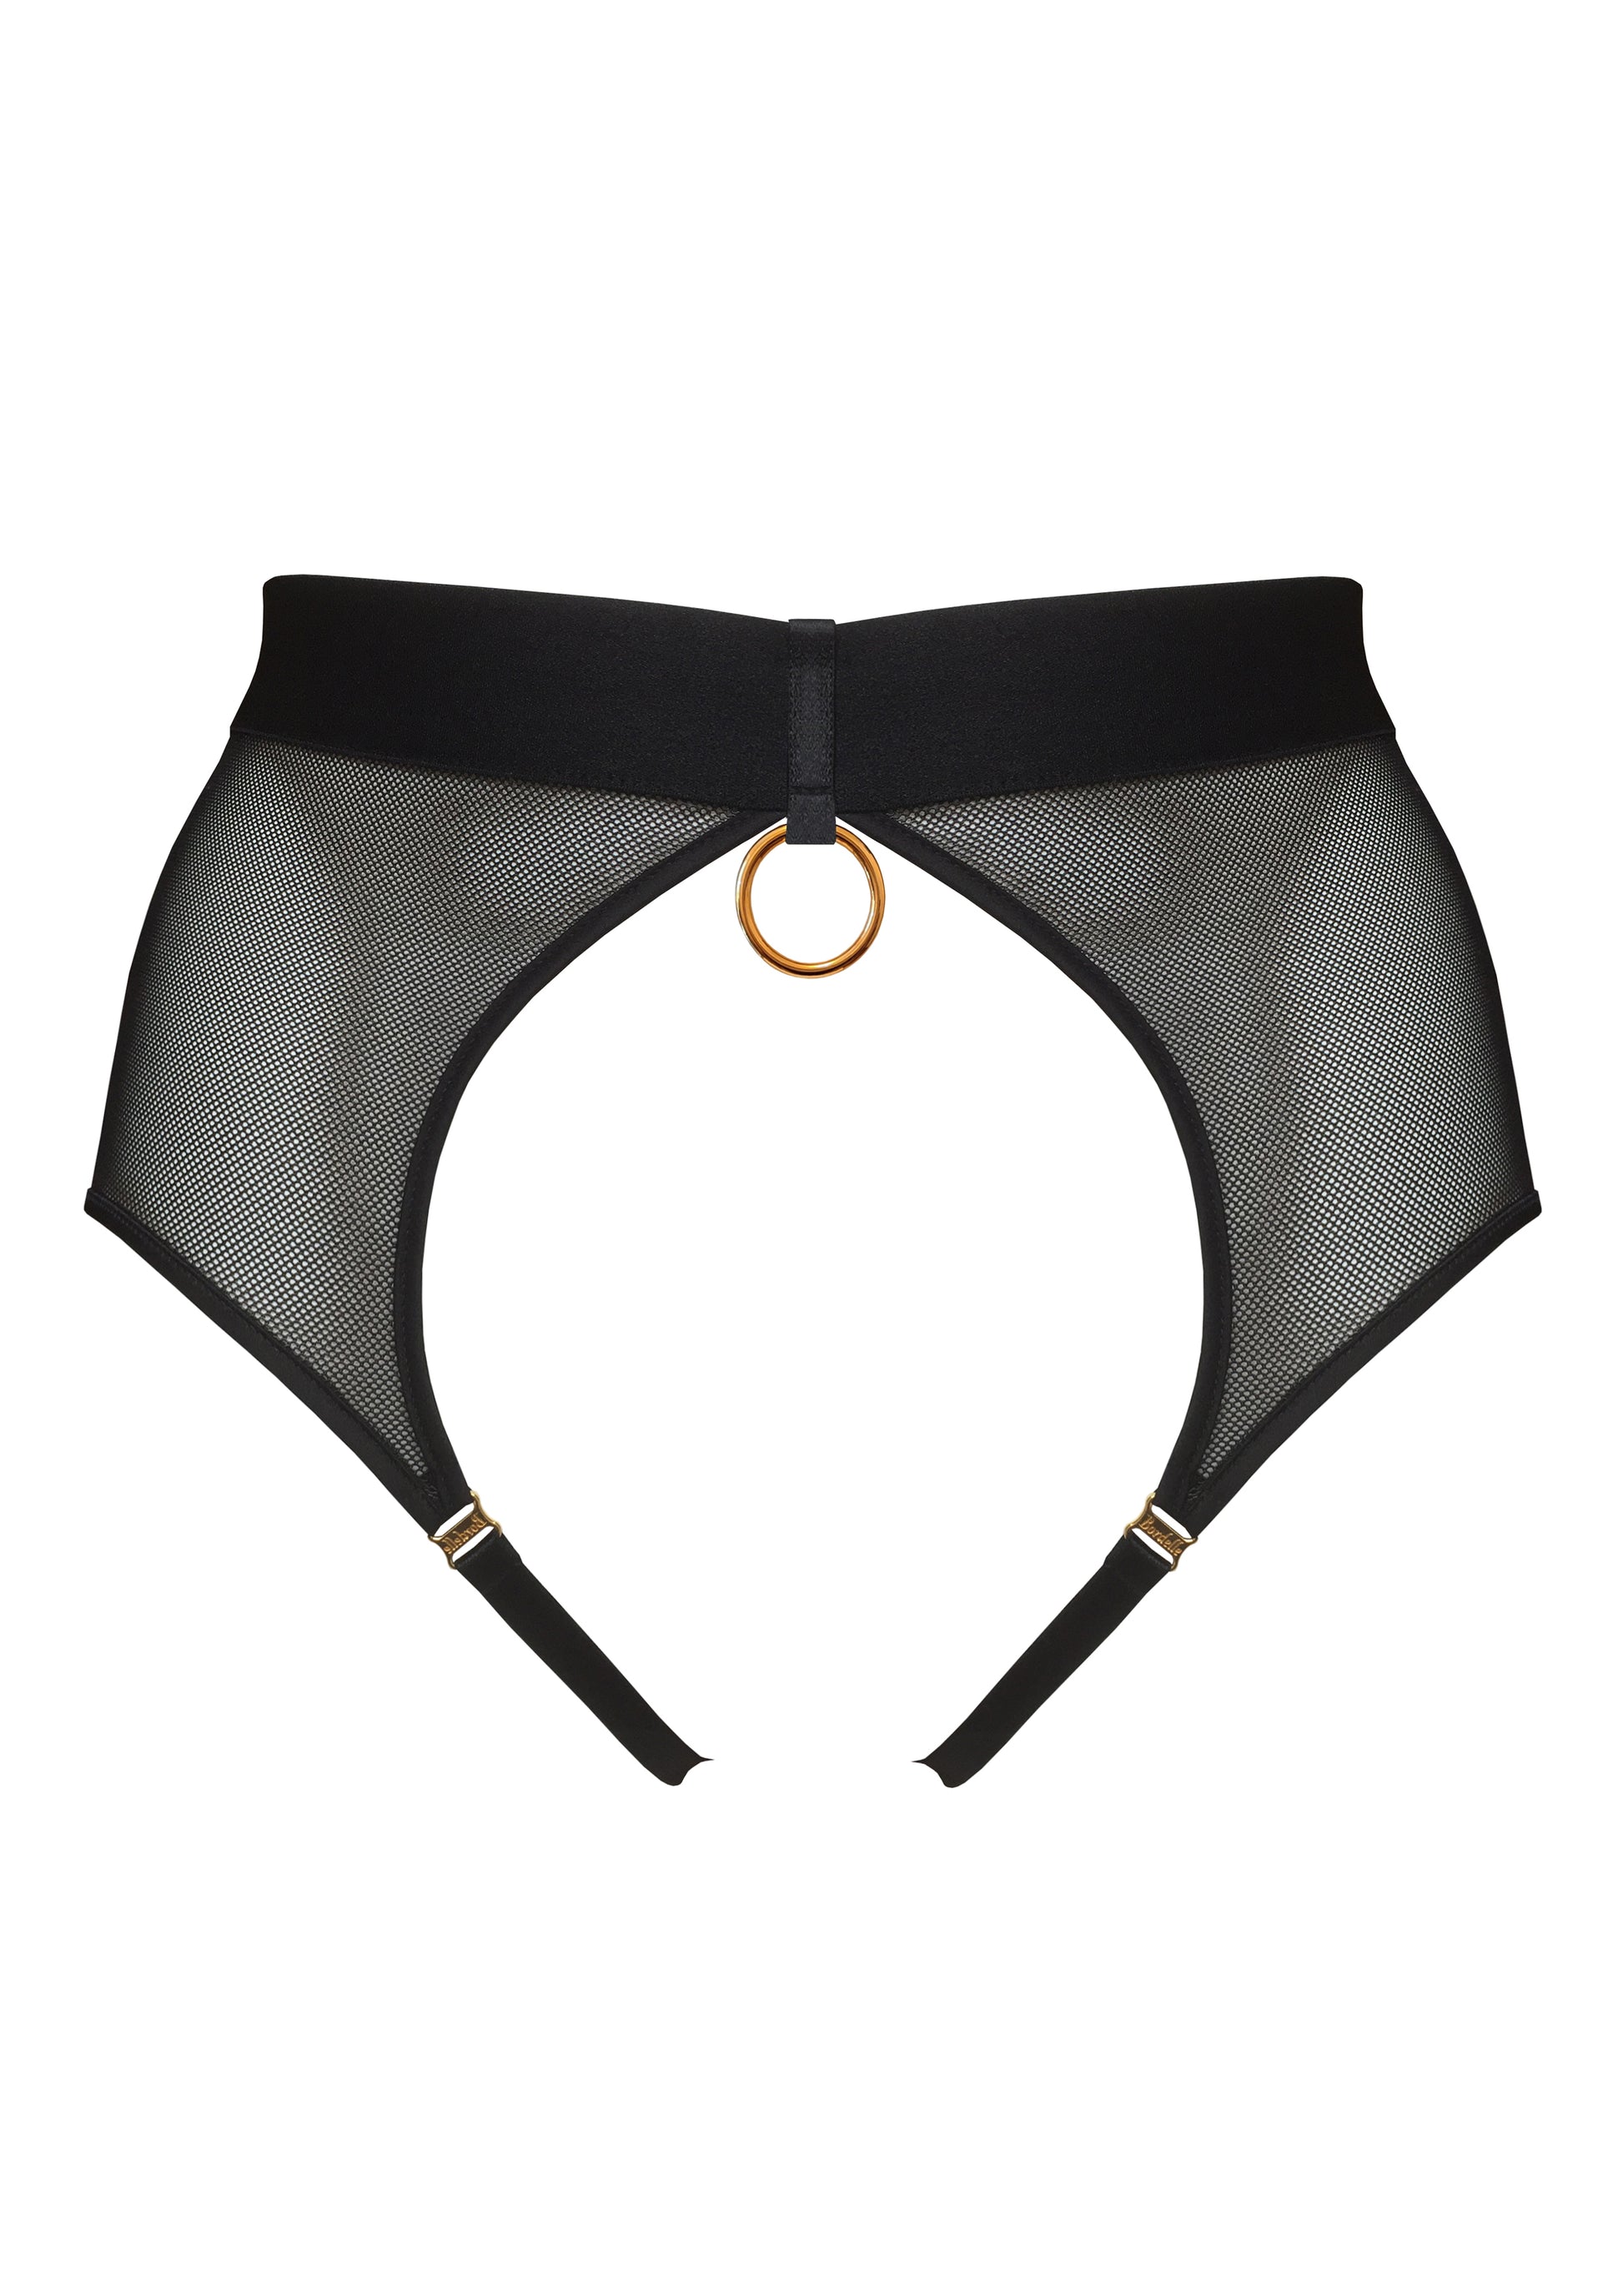 Bordelle Ula Ouvert Brief Black freeshipping - TrousseauOfDallas